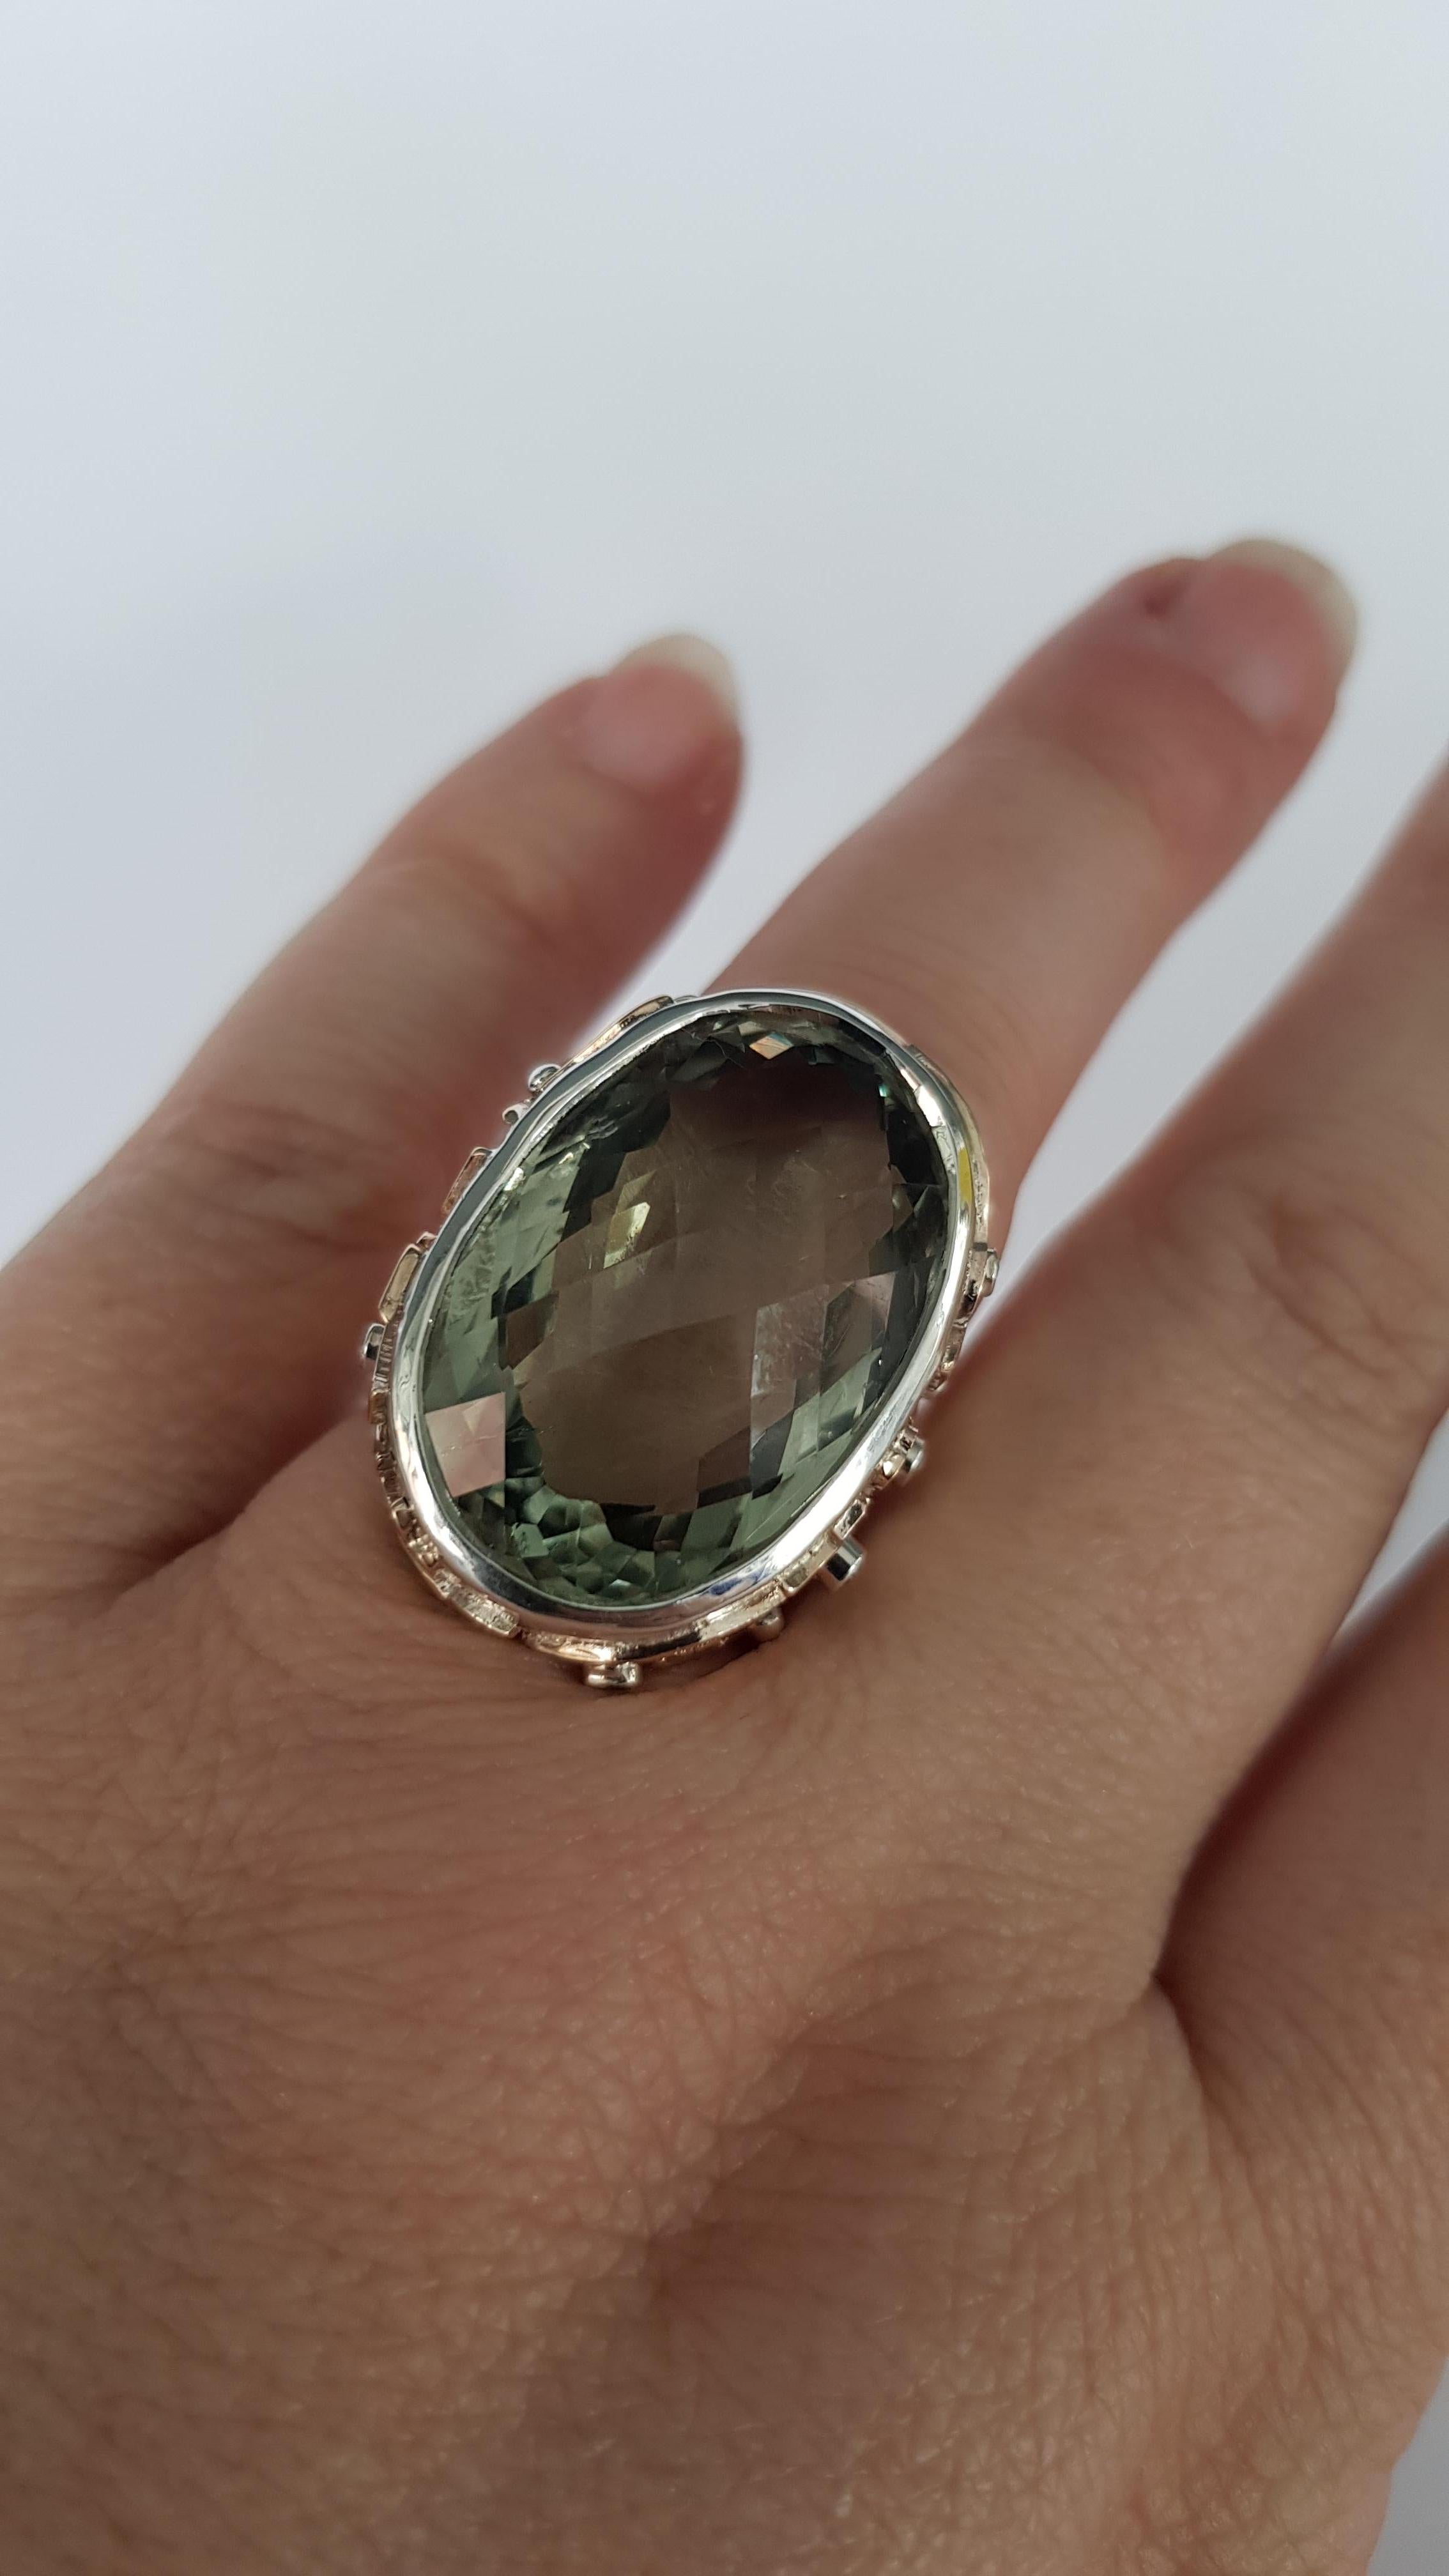 30cts of Prasolite and Diamond ring in silver and gold, it has lovely detail all over the ring not really caught in the picture here,  this is a large and beautiful dress ring ,a real flash of sultry green

ring size o
limited resizing 